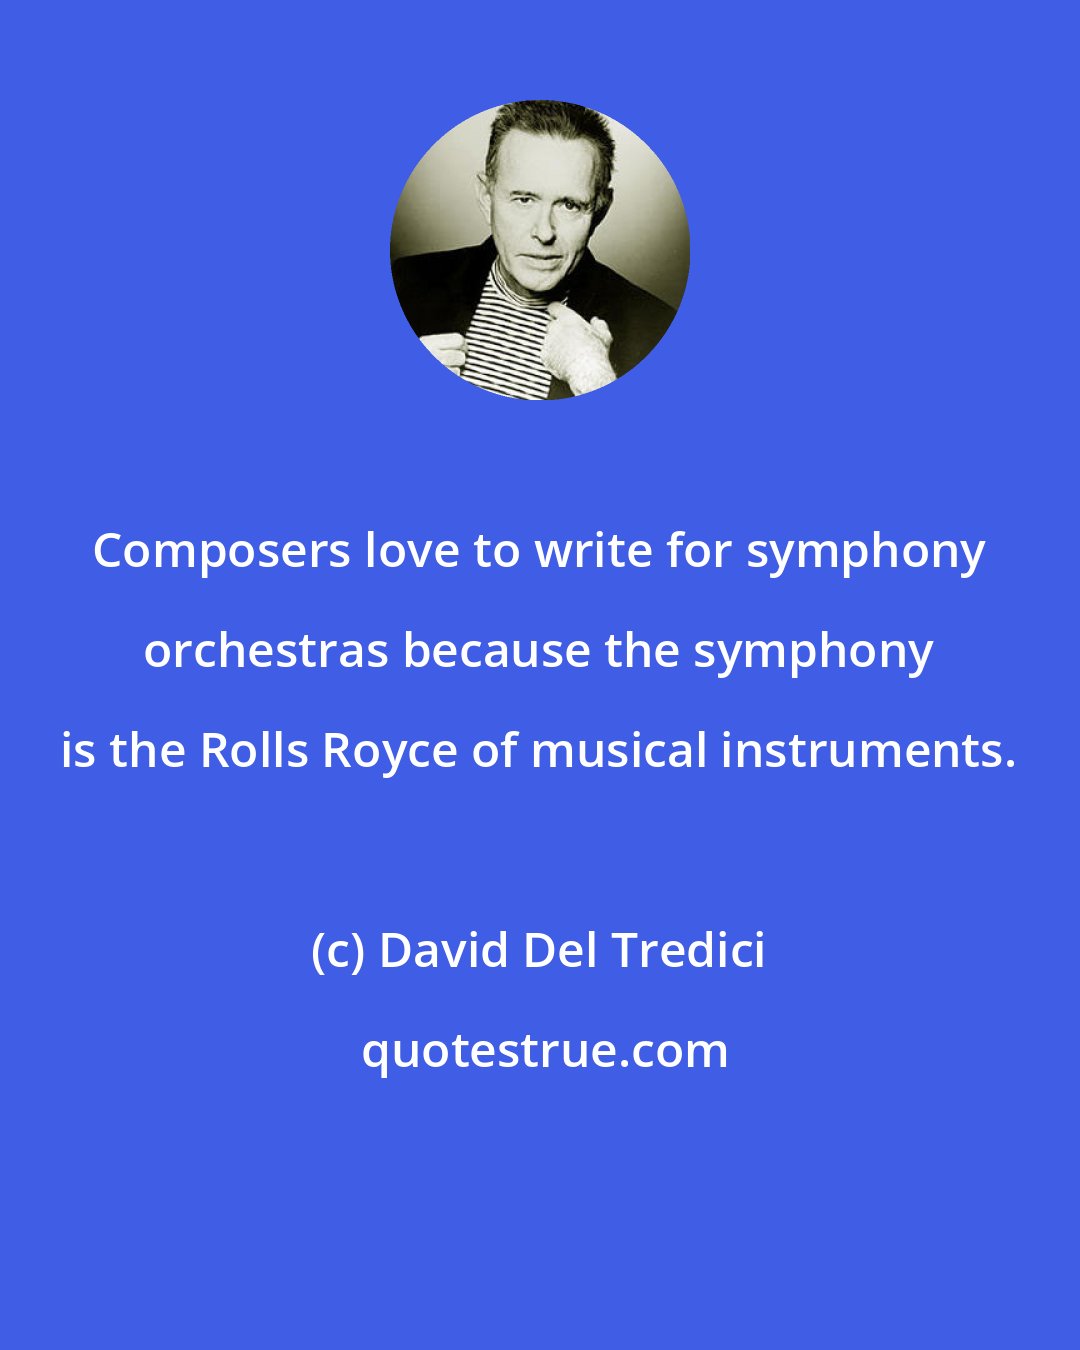 David Del Tredici: Composers love to write for symphony orchestras because the symphony is the Rolls Royce of musical instruments.